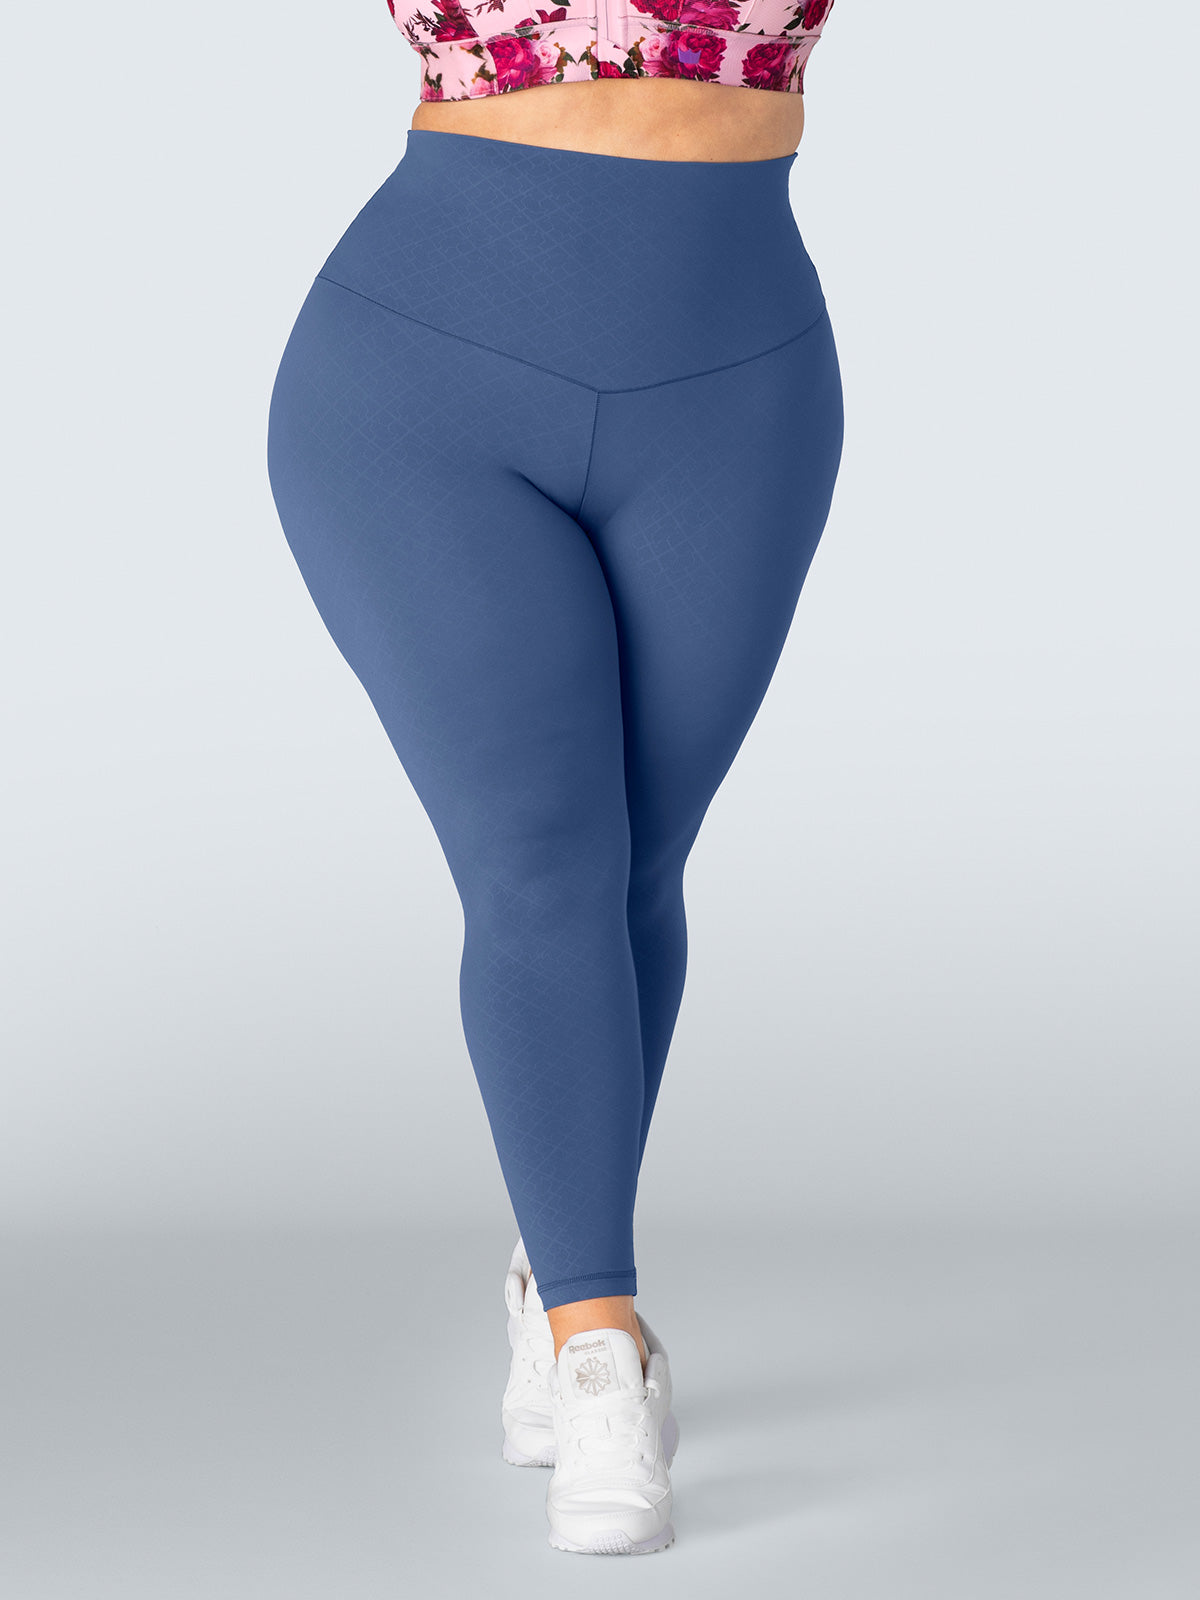 Simply Soft Luxe Long Legging - Navy